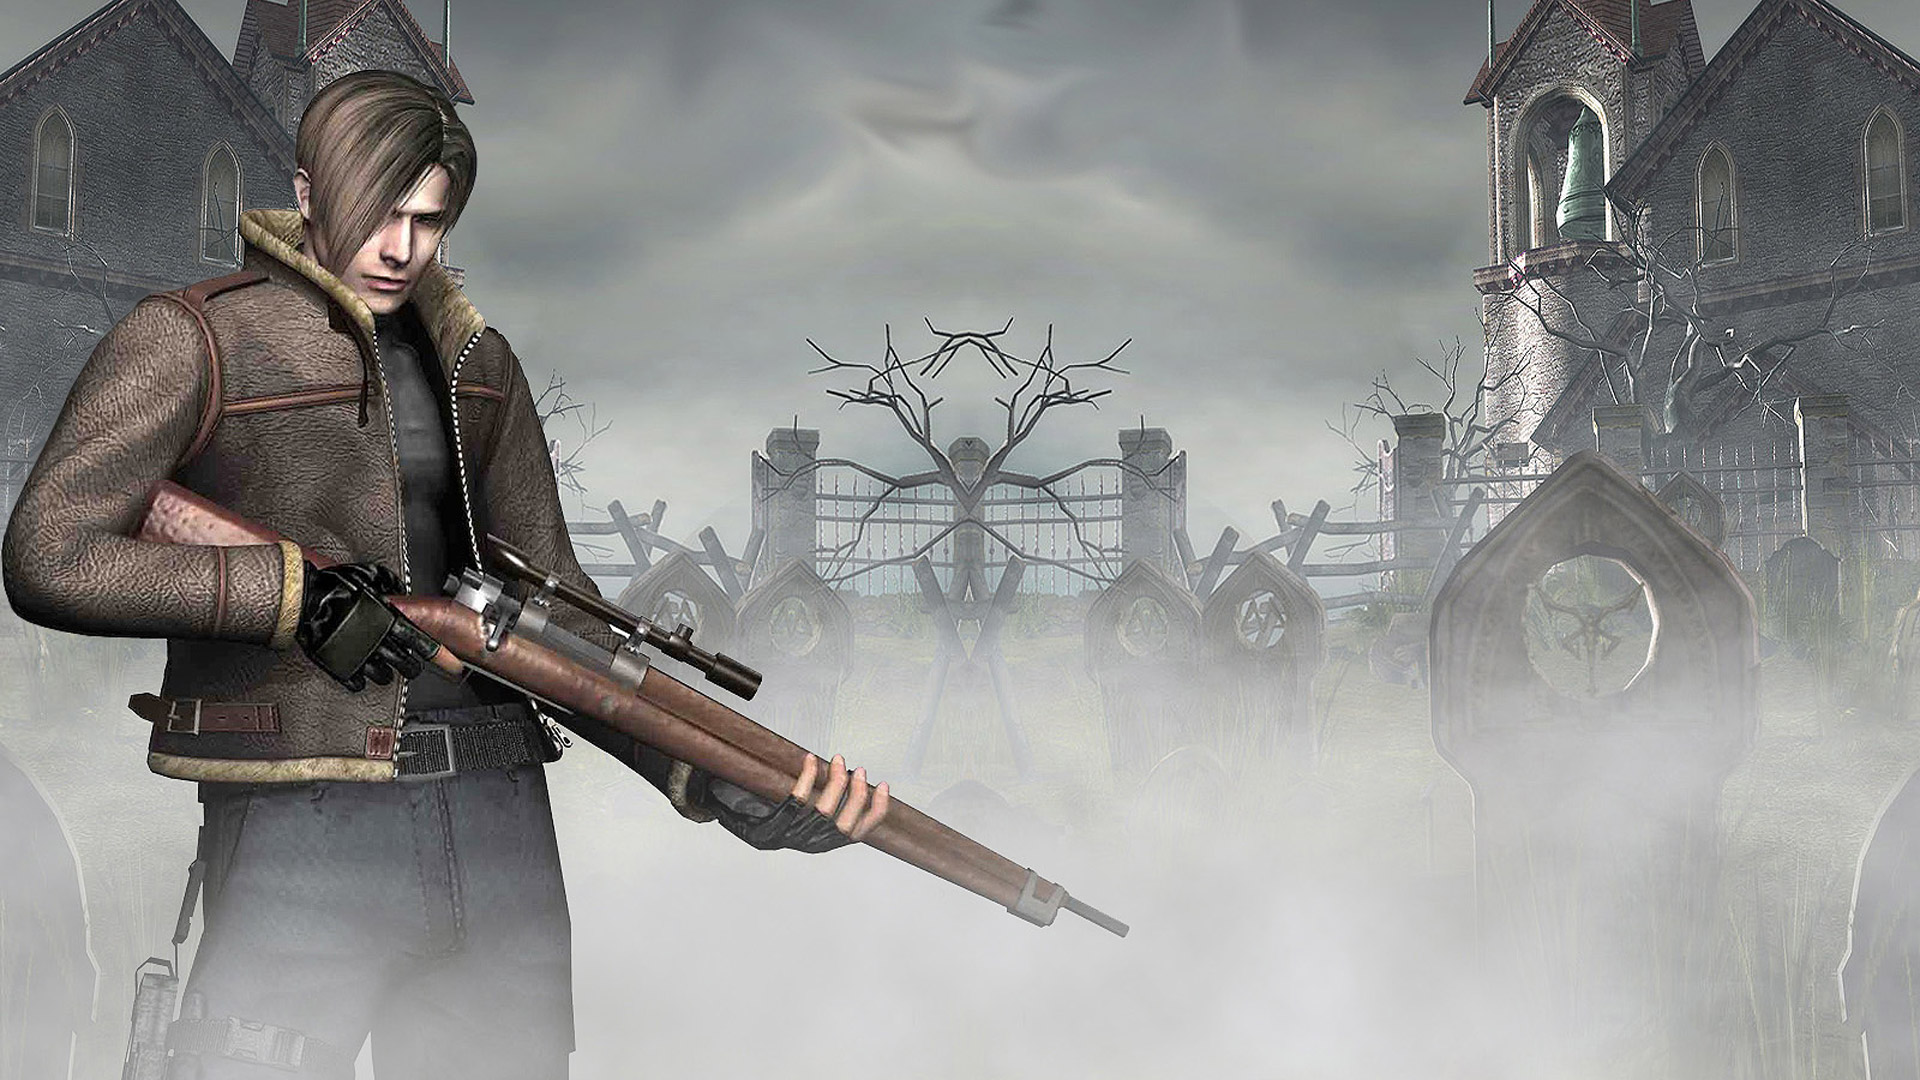 Steam resident evil 4 ultimate hd фото 18